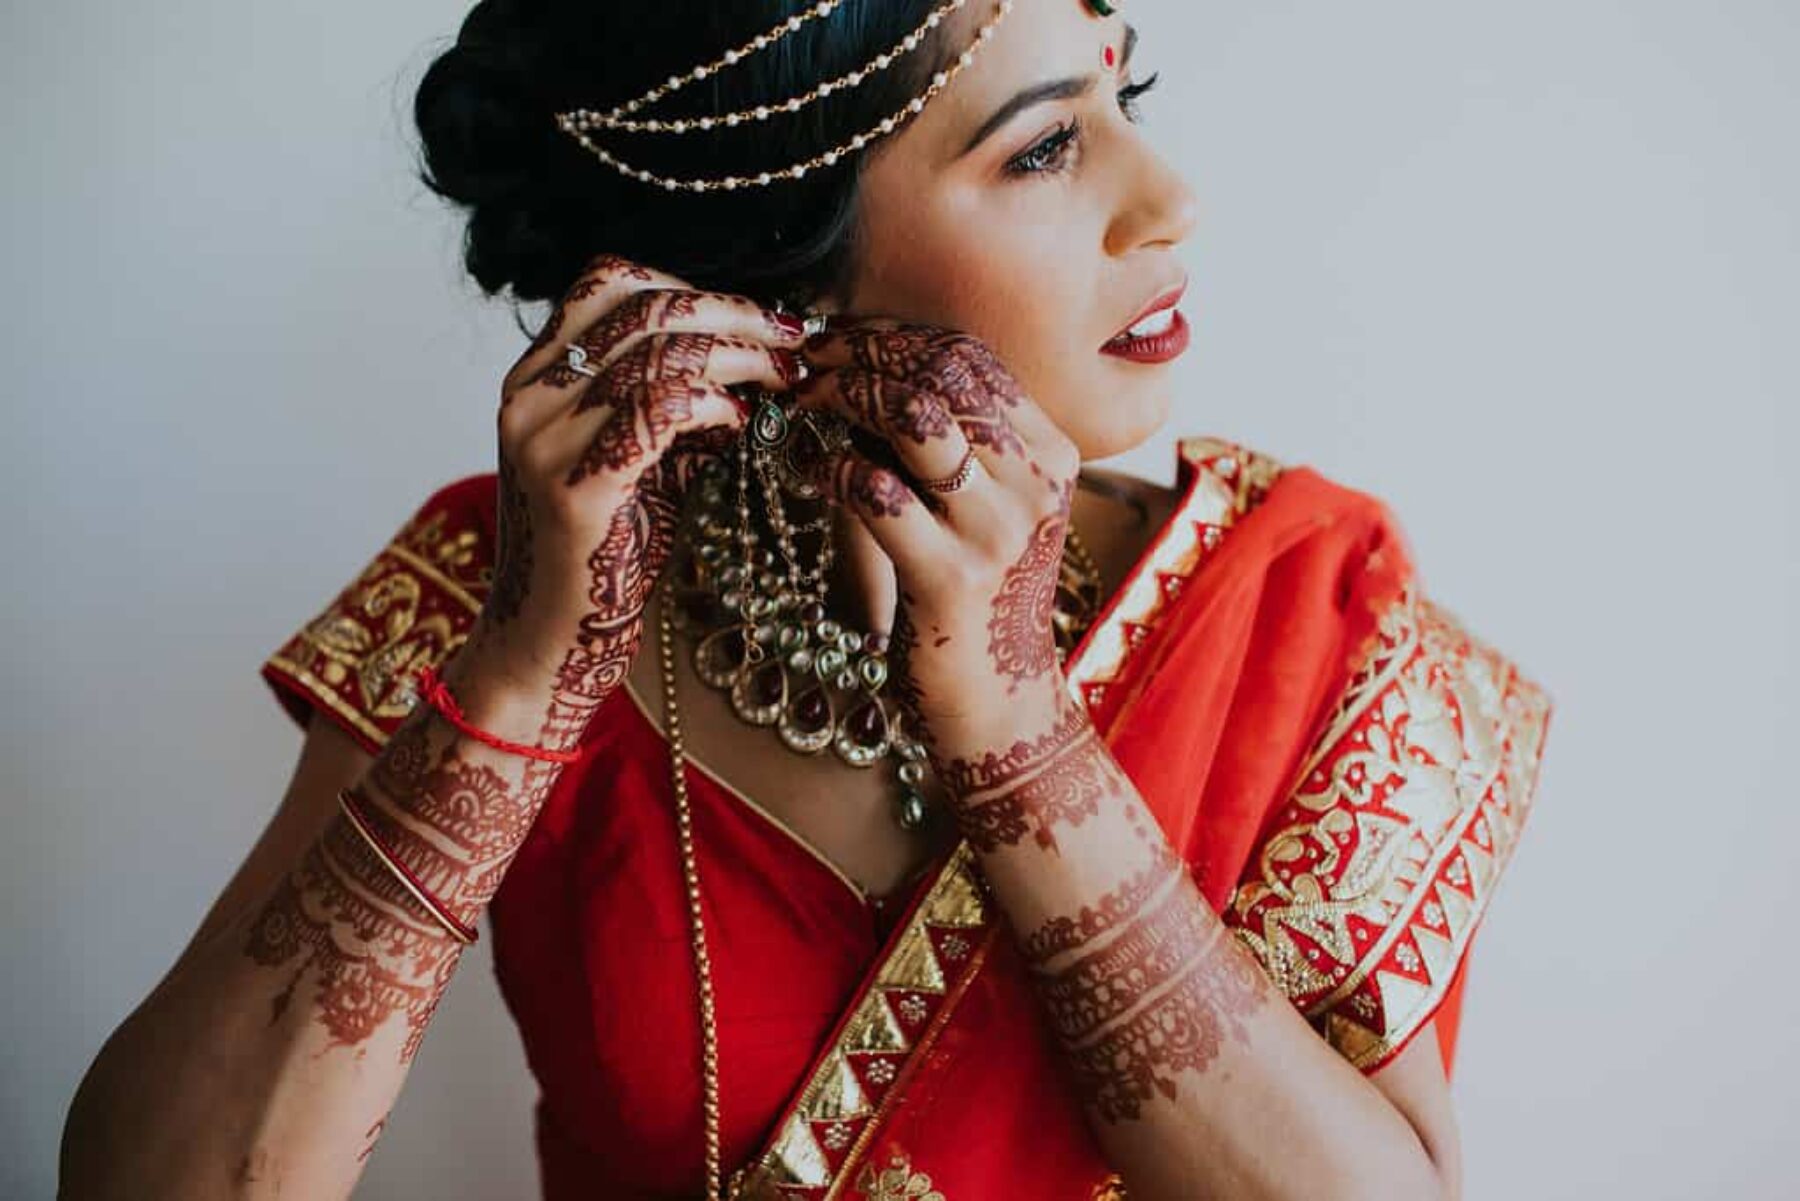 stunning Hindu bride in vibrant red and gold wedding attire